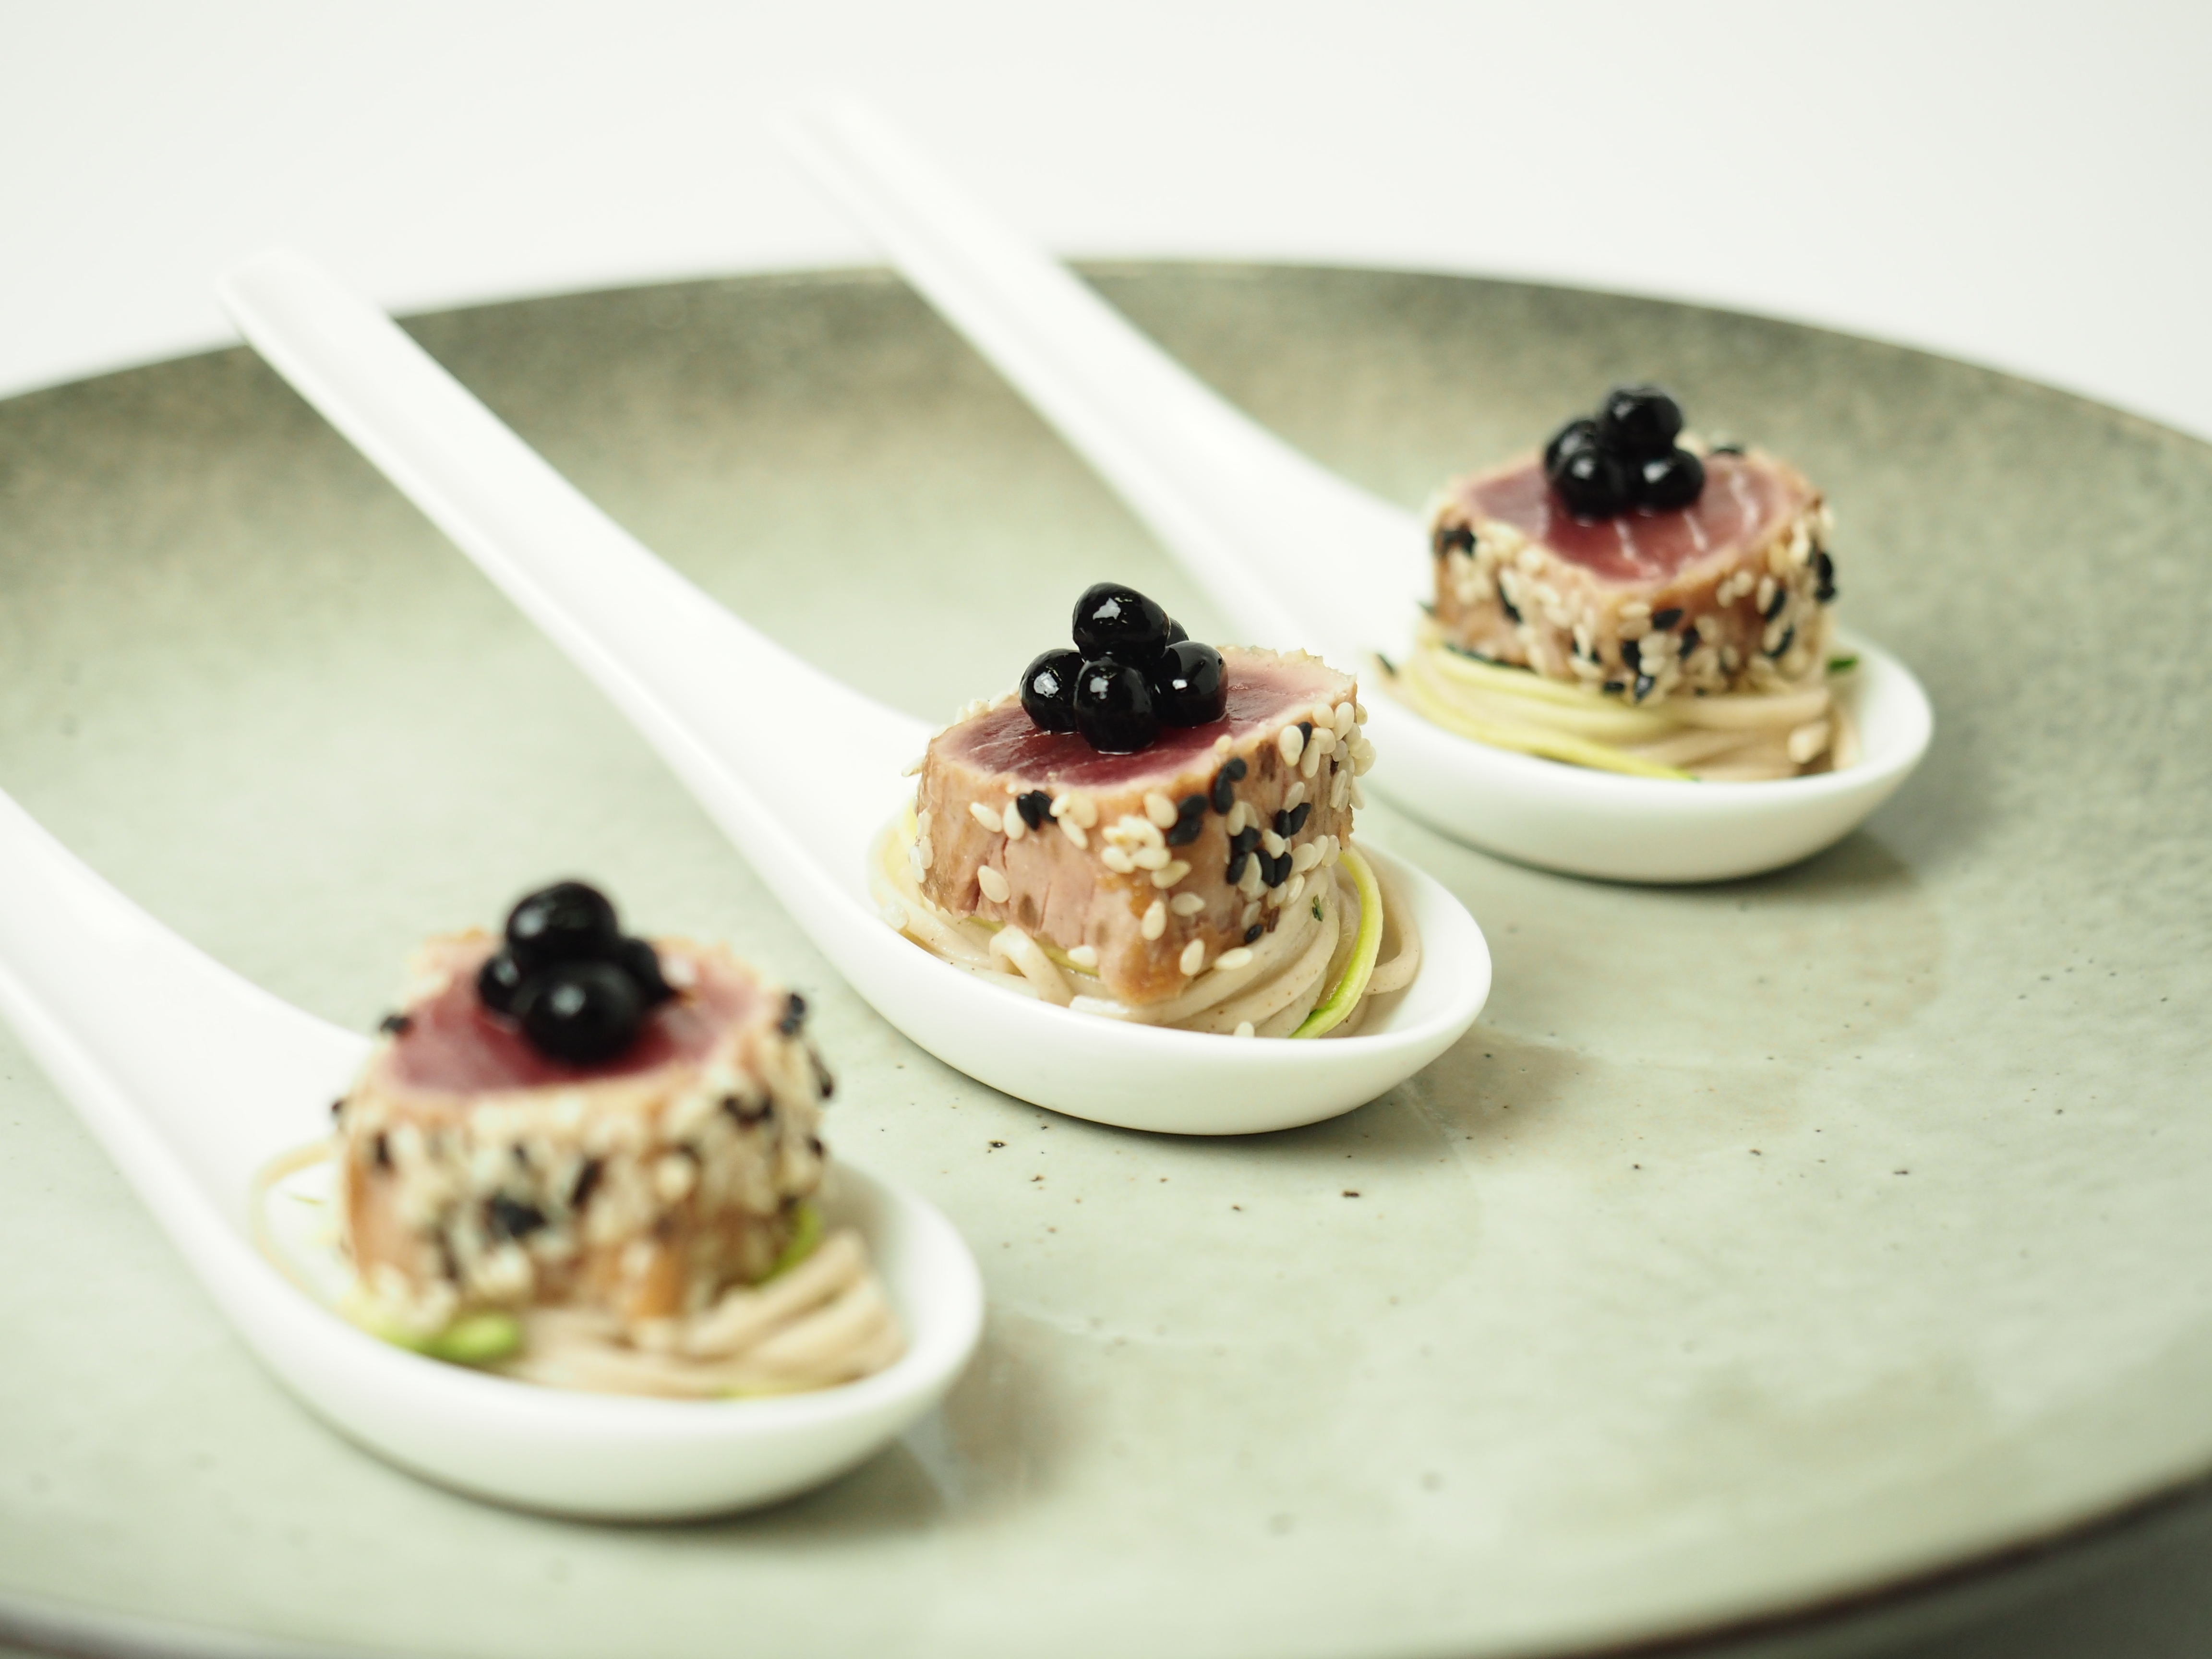 Peninsula Larders Sesame Crusted Tuna and Soy Flavour Pearls are an Australian made luxury gourmet garnish